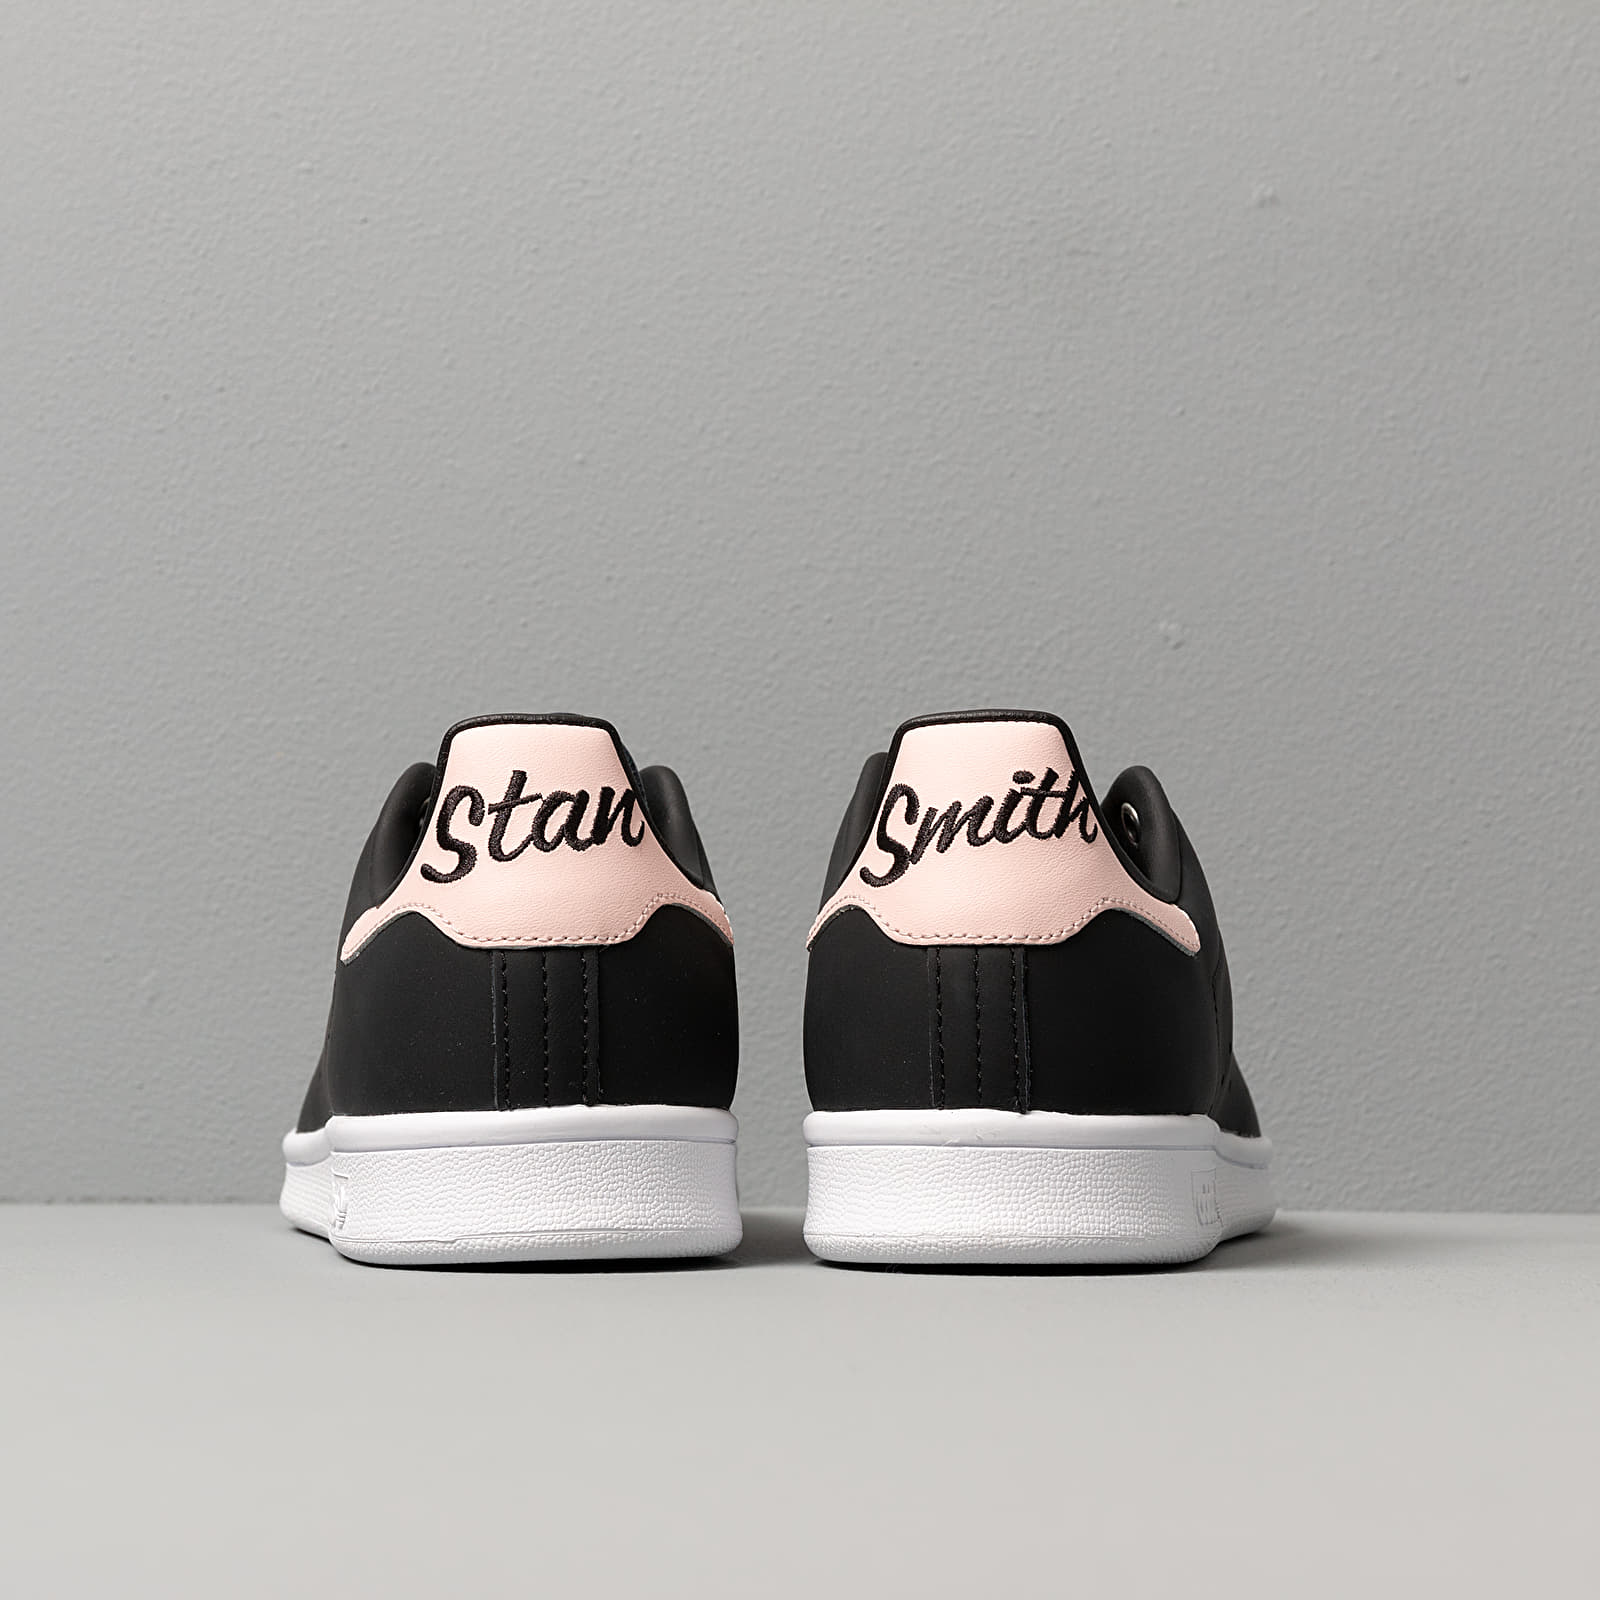 Women's shoes adidas Stan Smith W Core Black/ Ice Pink/ Ftw White | Footshop